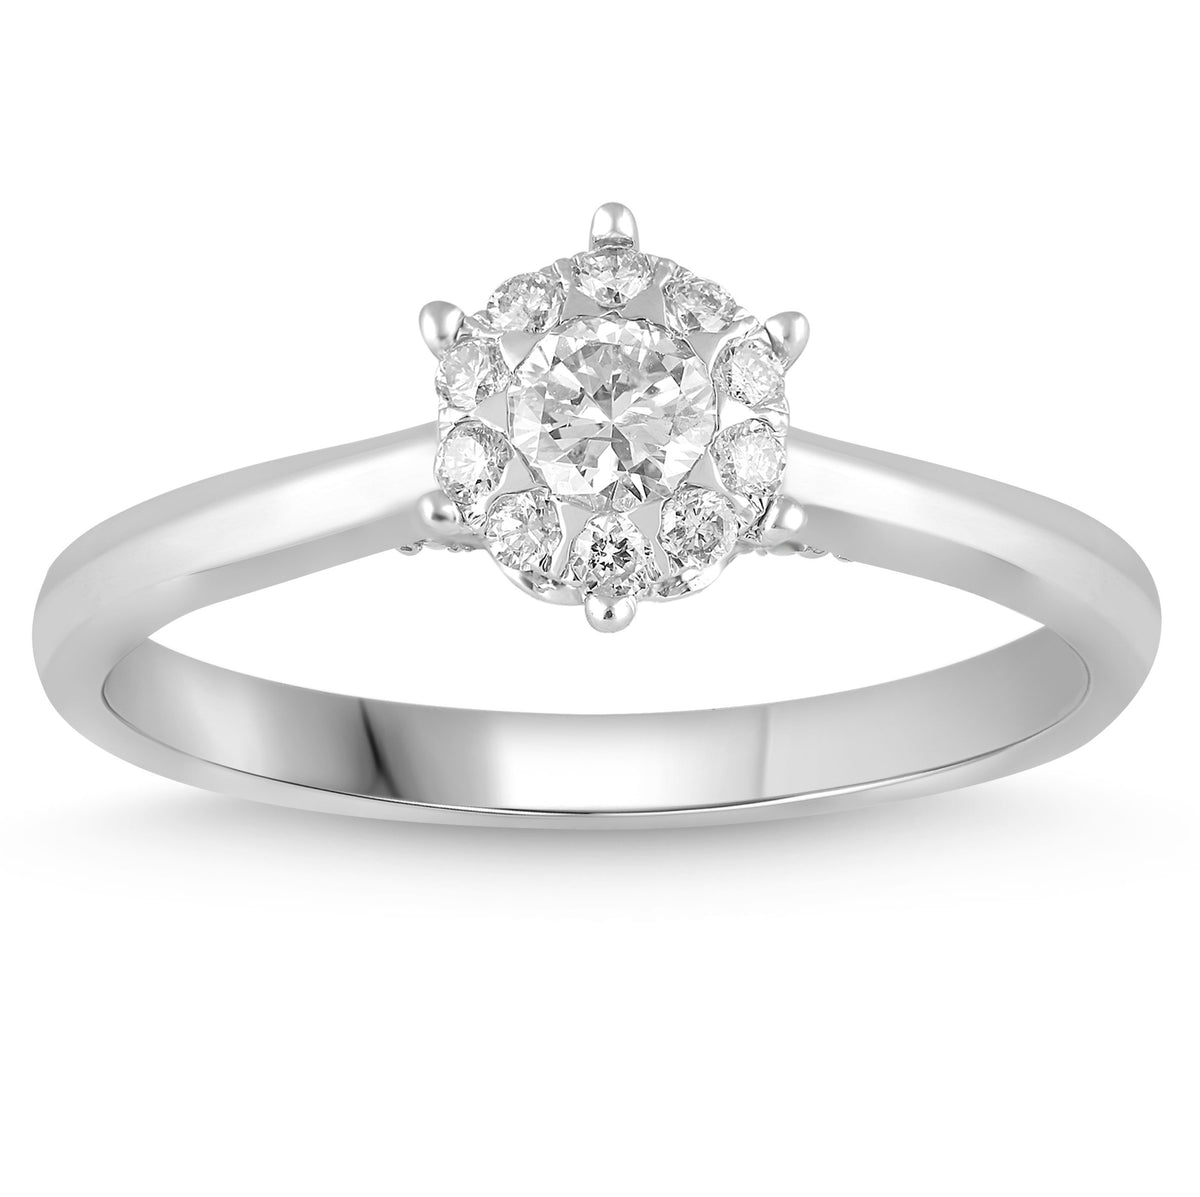 Collection Diamond Engagement Ring | Wedding & Unique Engagement Rings ...